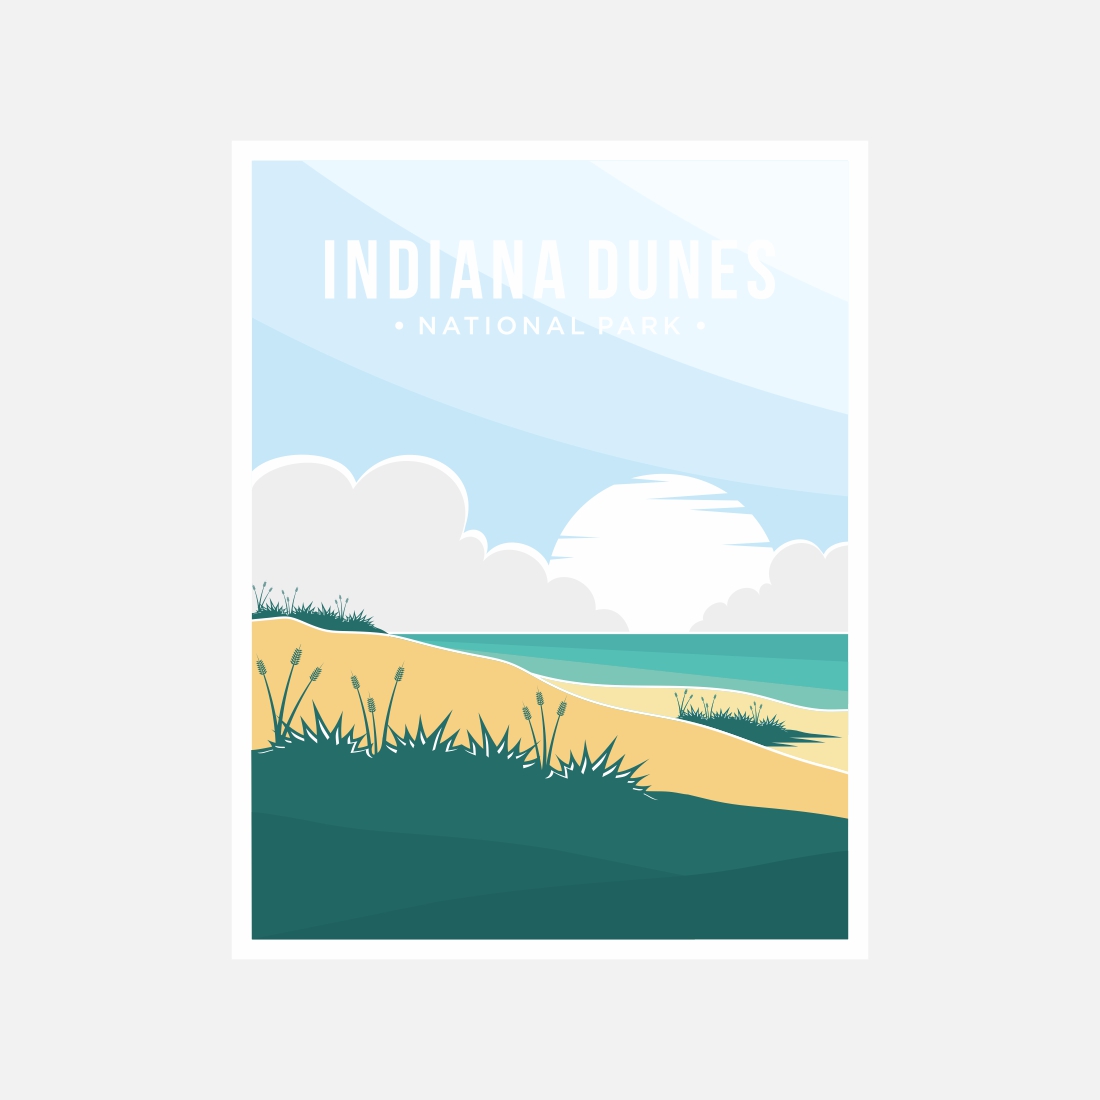 Indiana Dunes national park poster vector illustration design – Only $8 preview image.